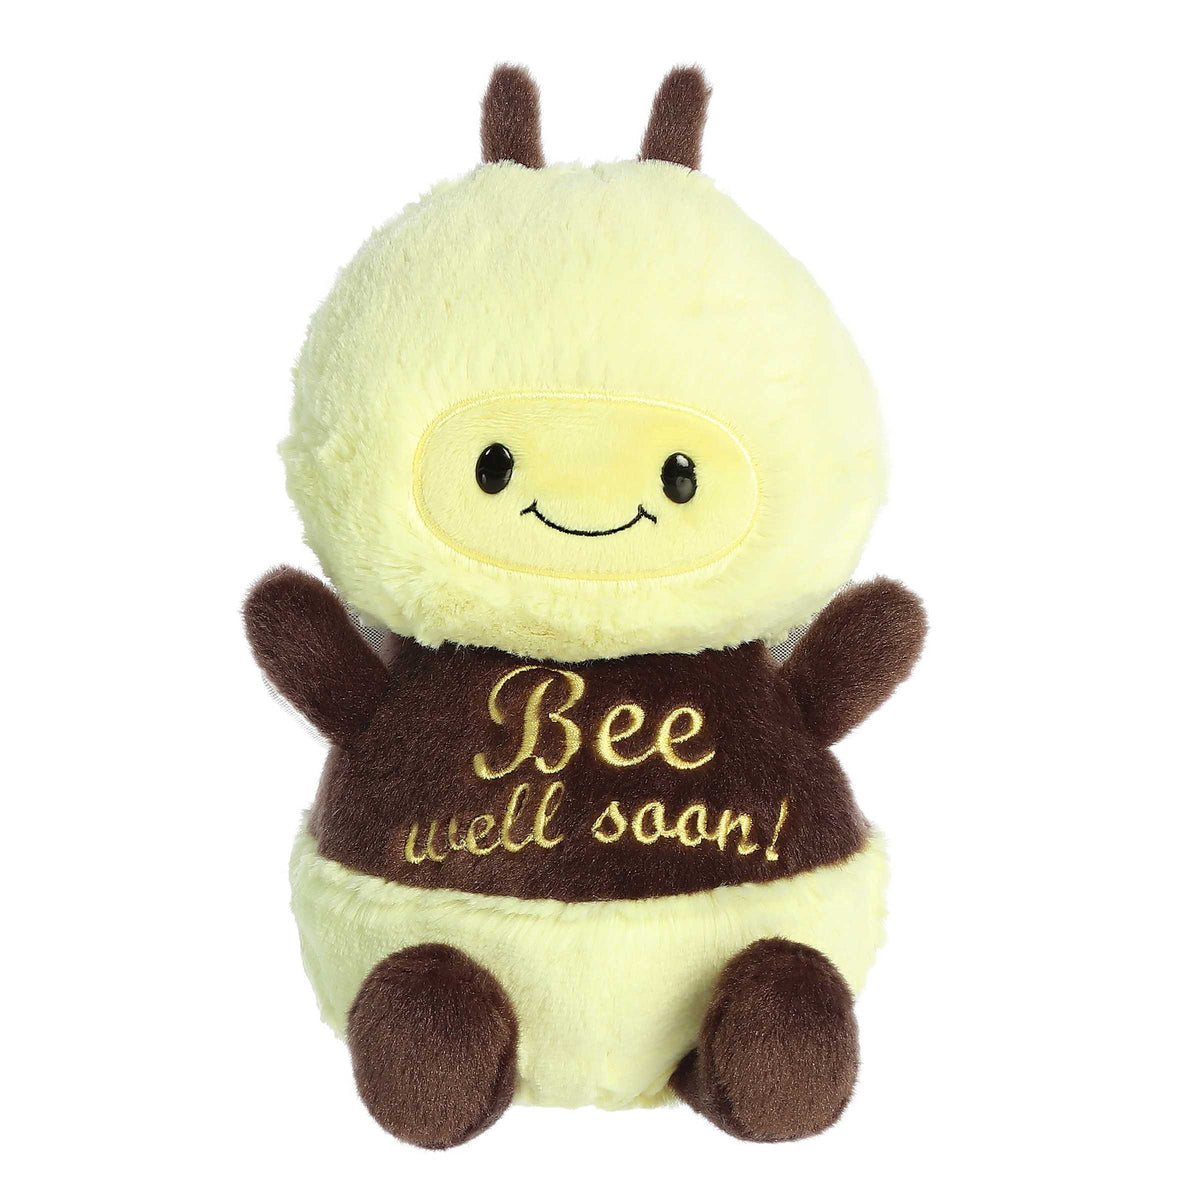 Huggable bee plush toy with a yellow and brown body, silver wings on its back, and a "Bee Well Soon!" pun written across